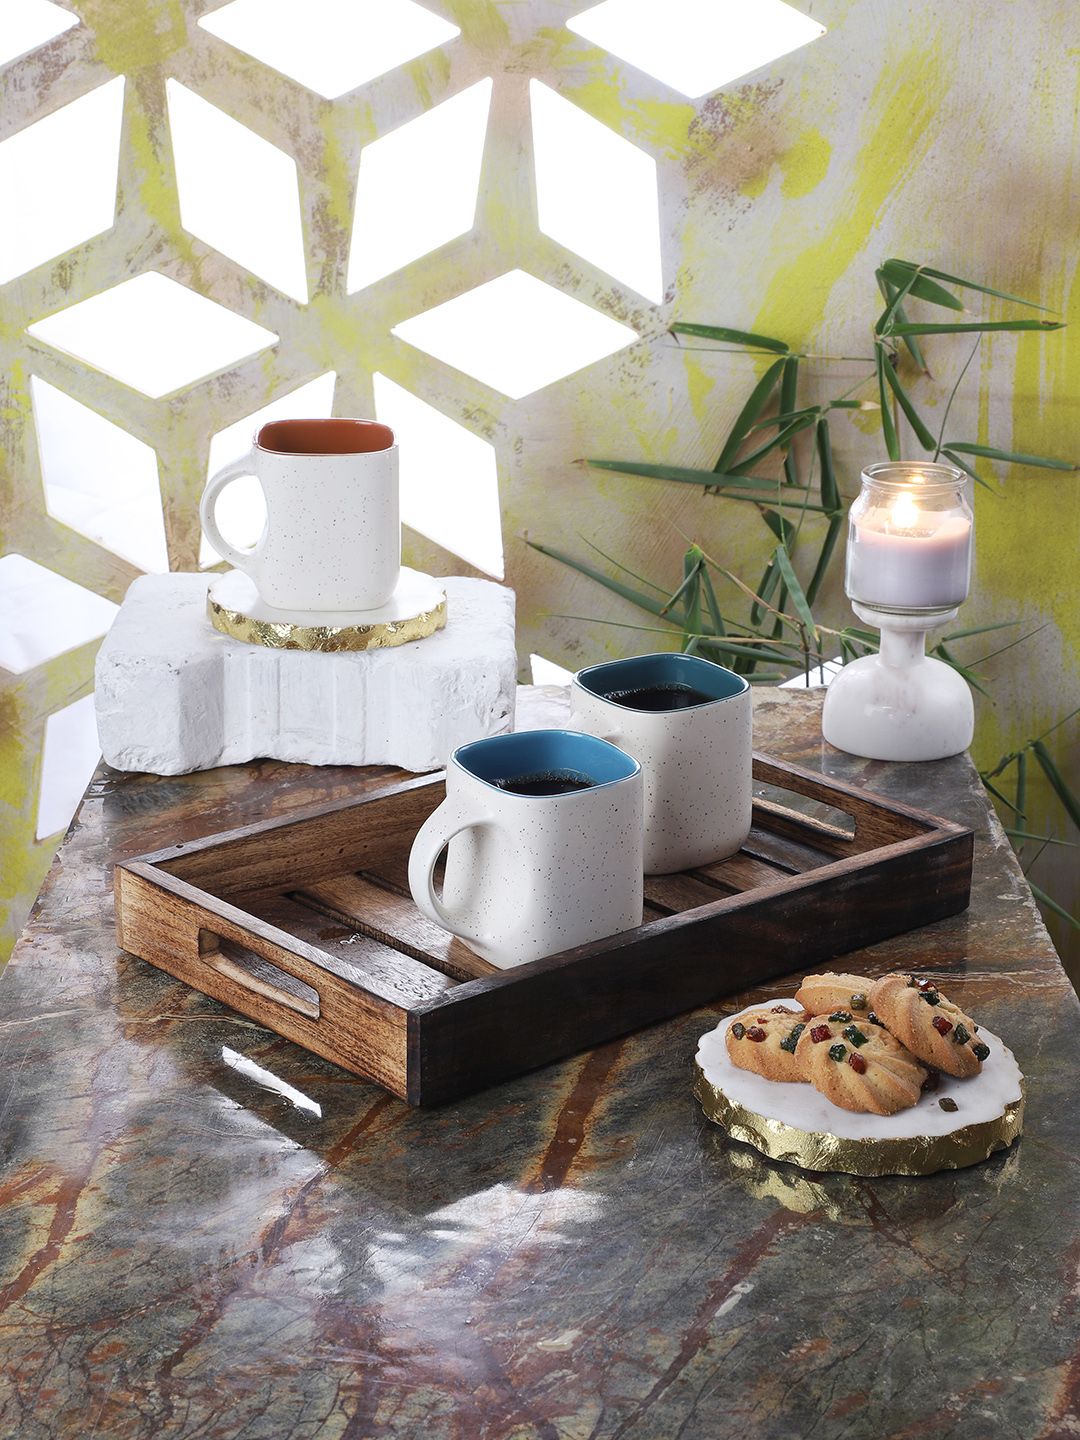 CDI White 6-Pieces Textured Ceramic Cups Set with Tray Price in India